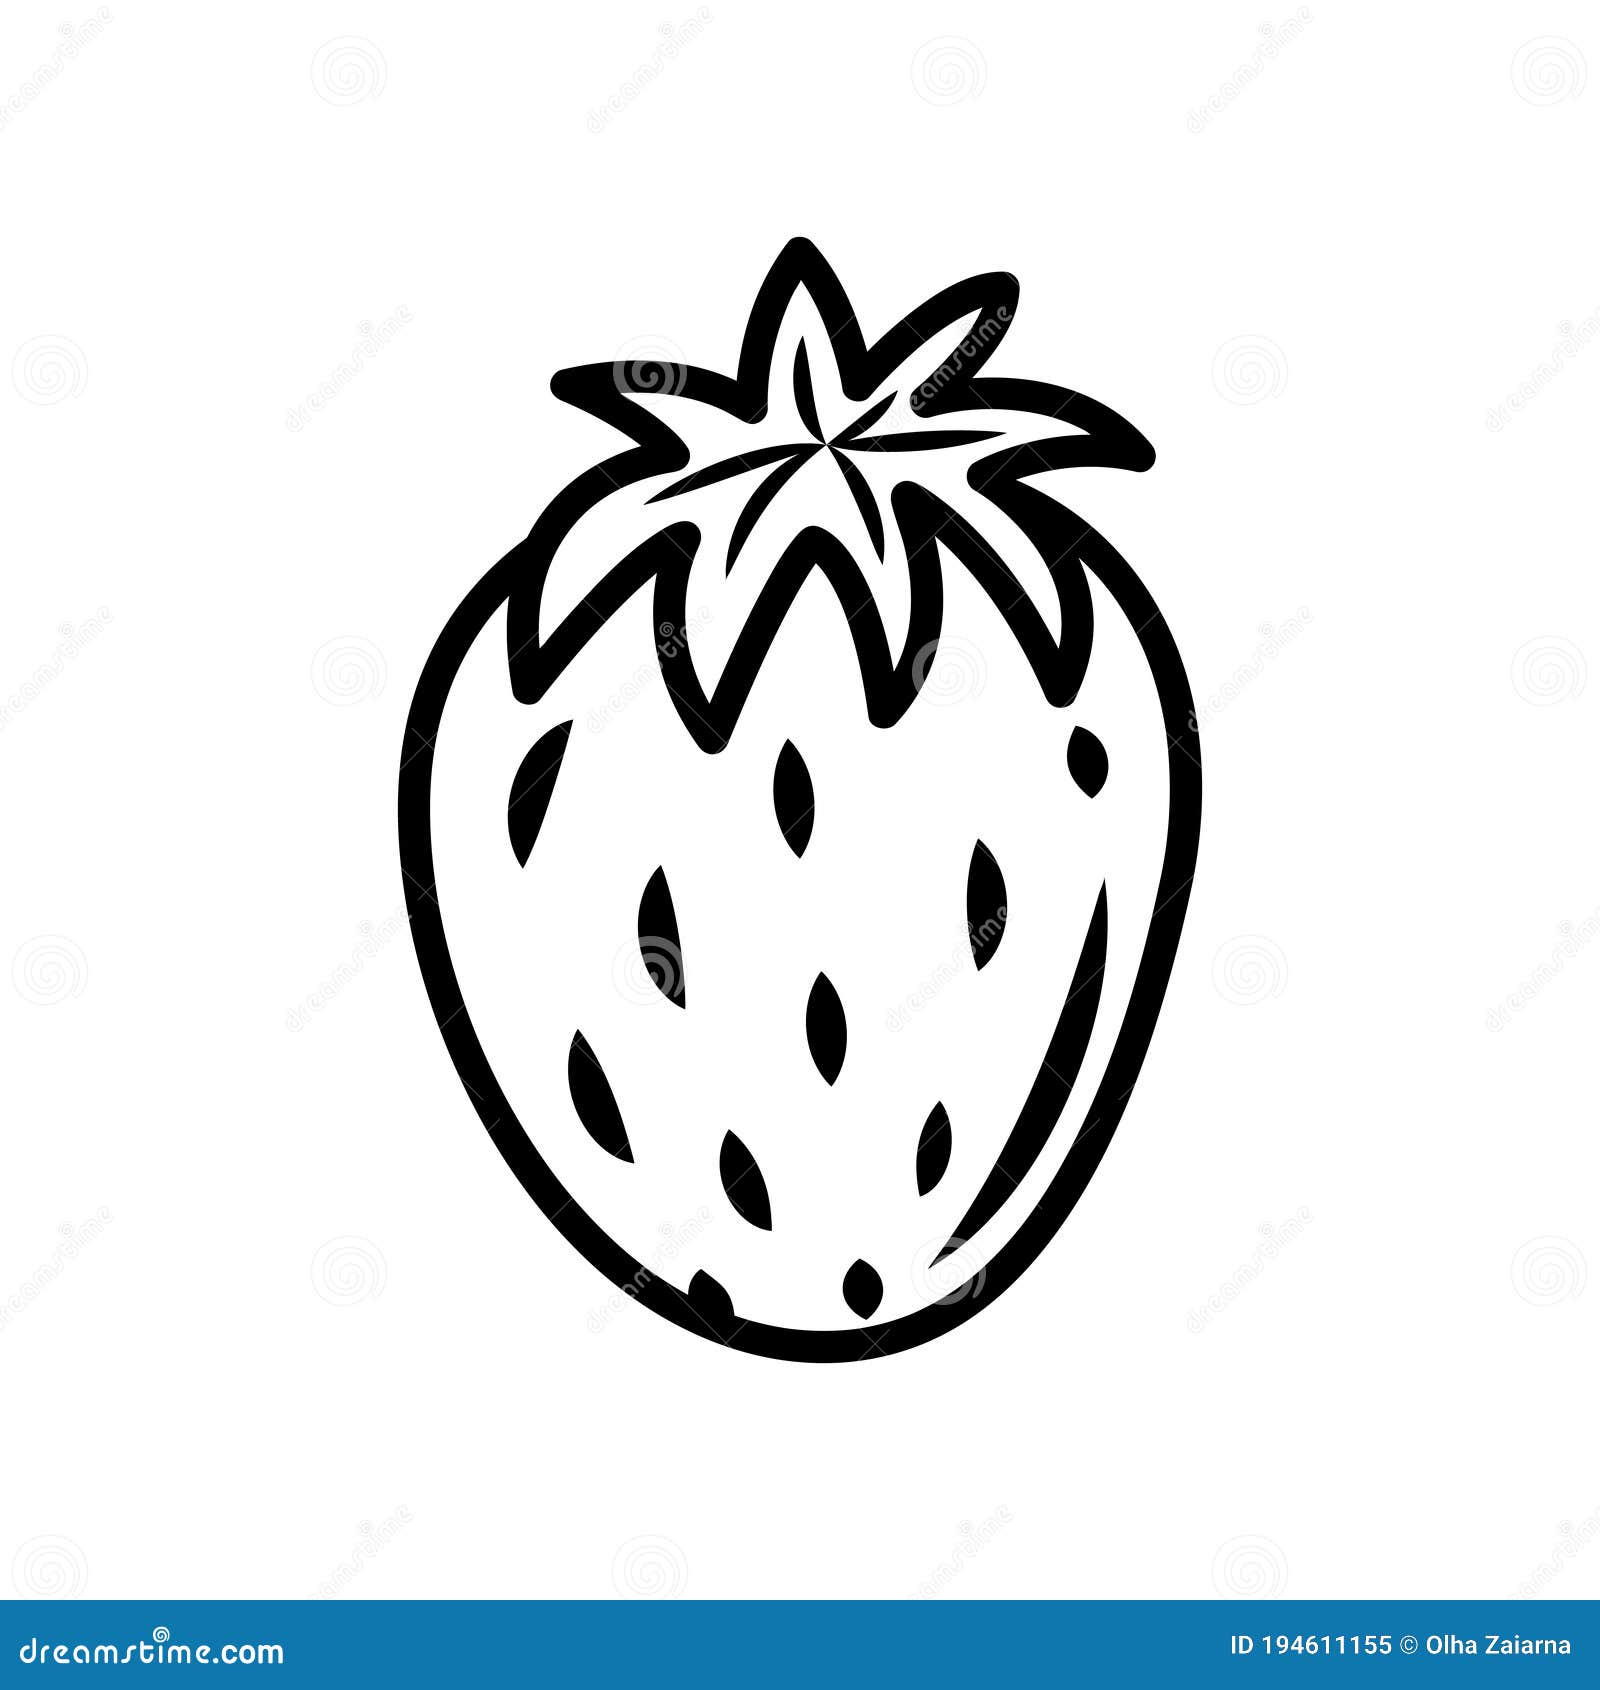 Vector Line Art Strawberry Icon. Isolated Fruit Silhouette in ...